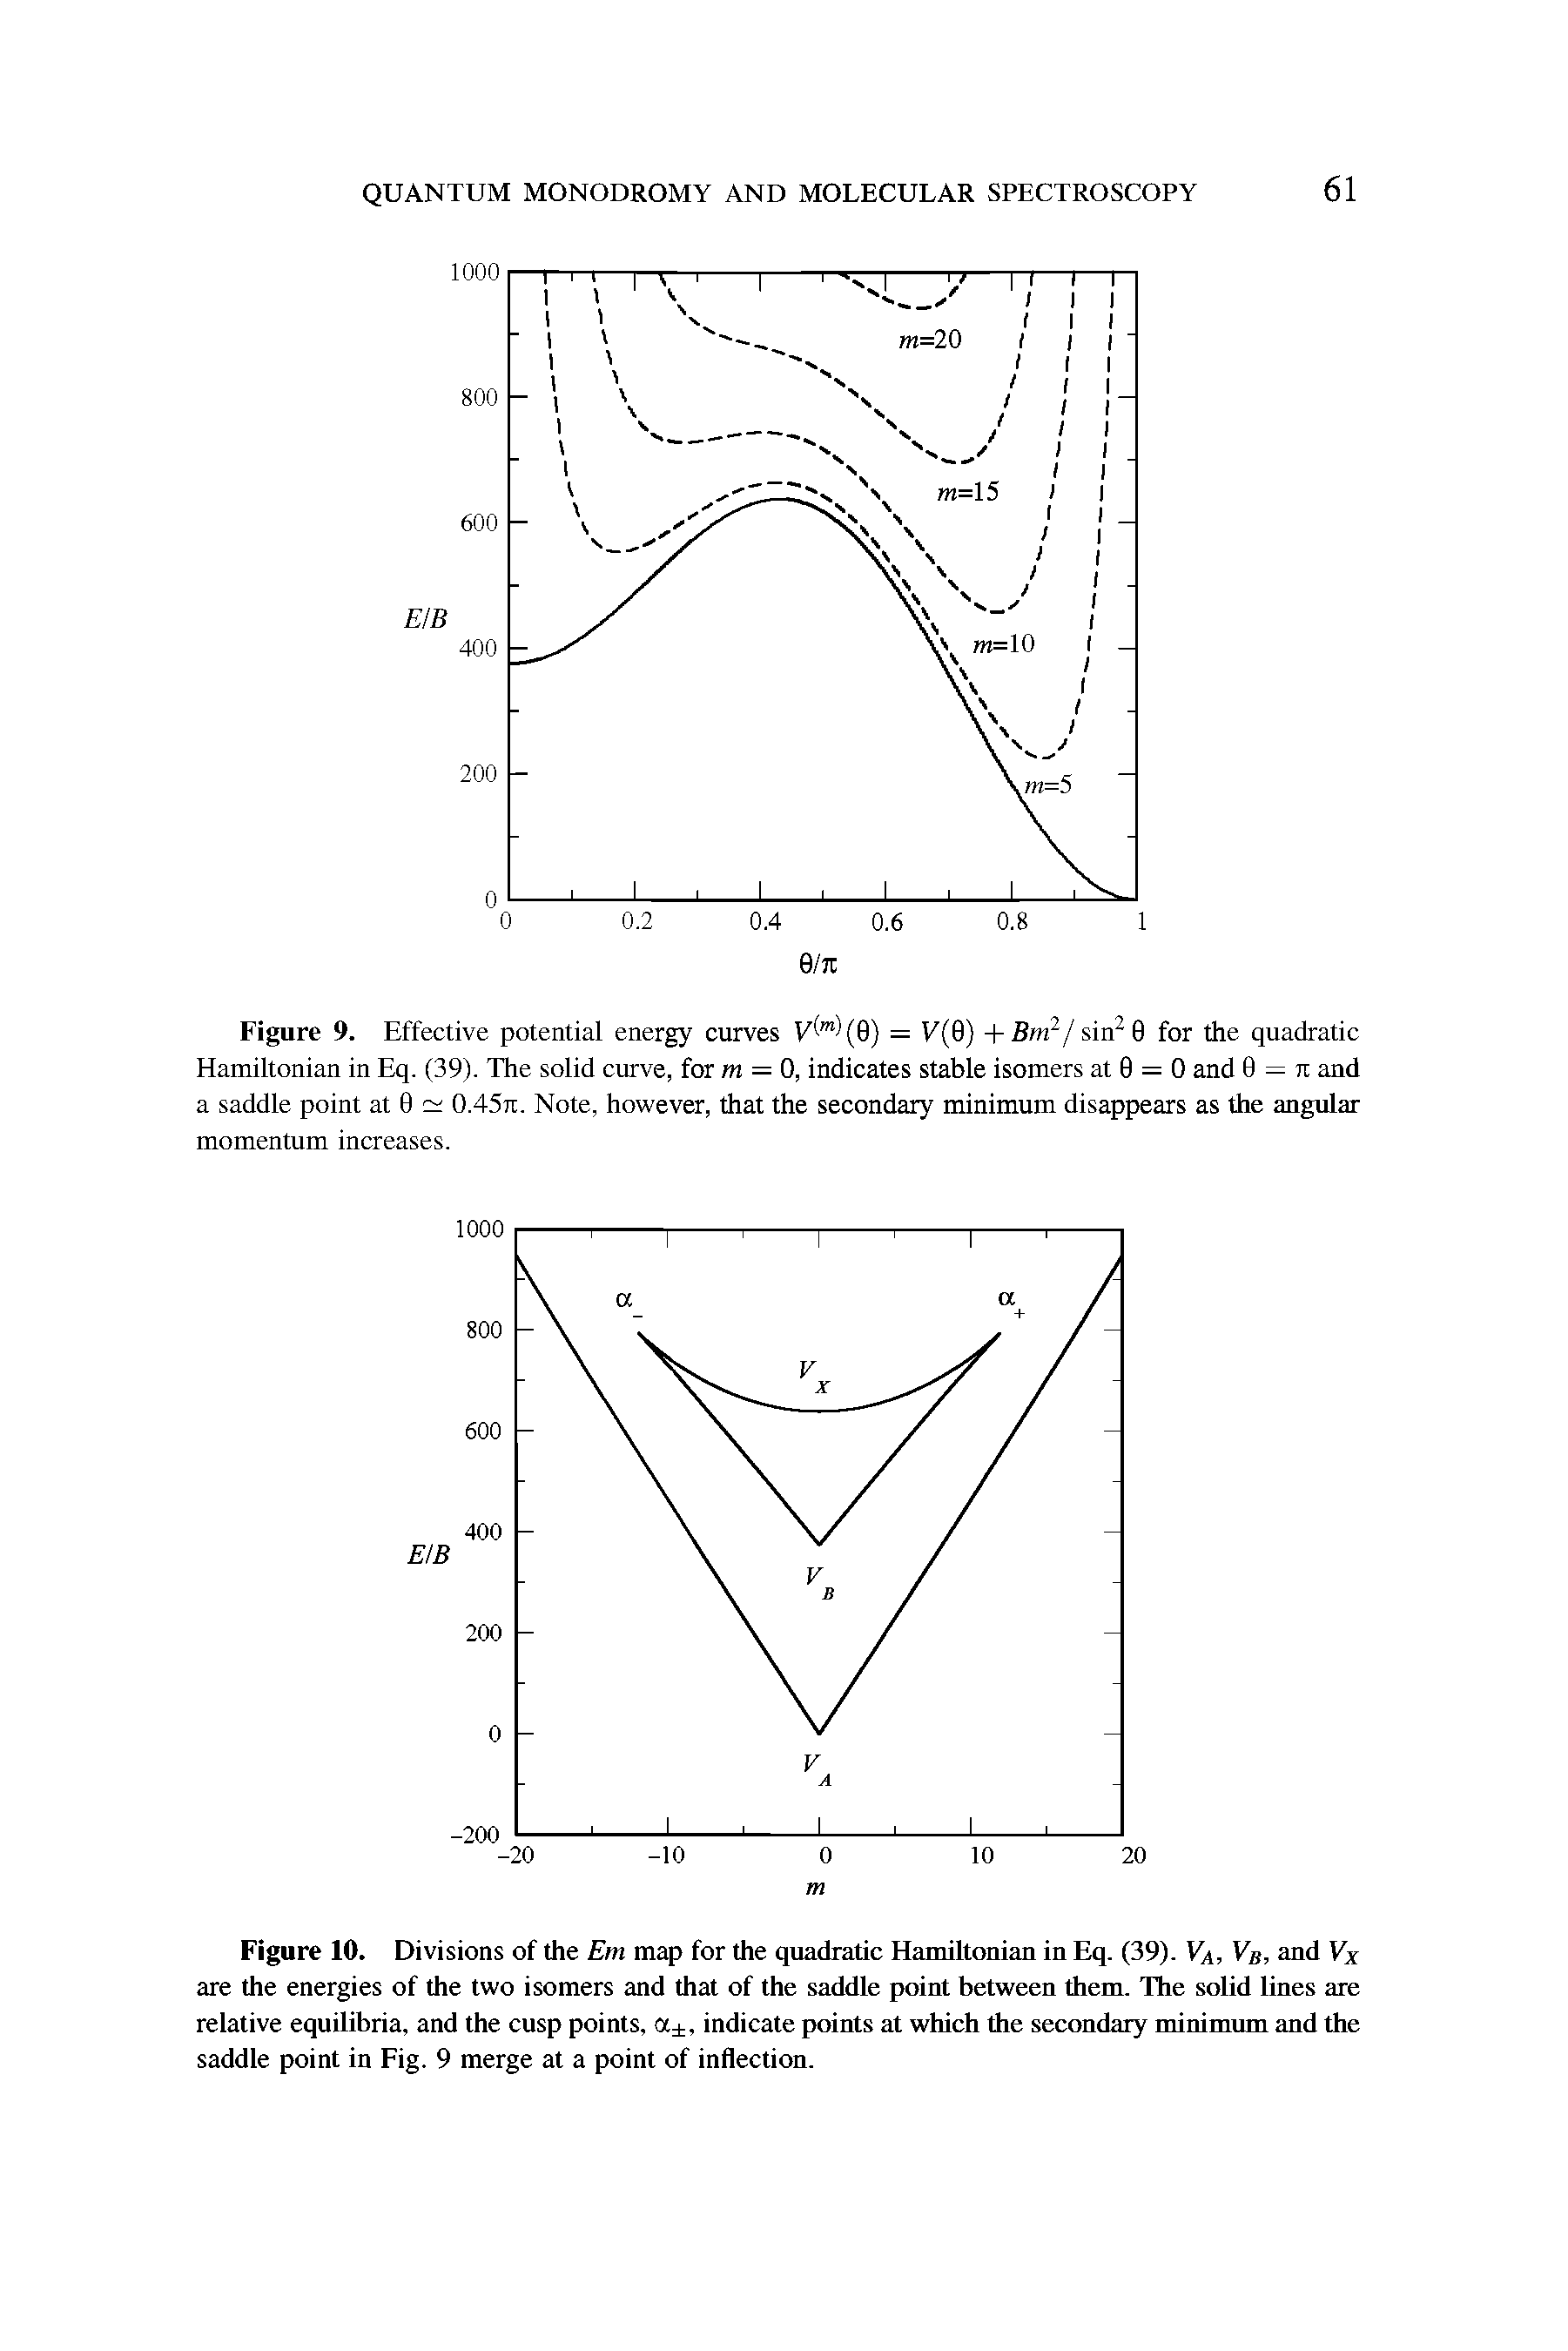 Figure 10. Divisions of the Em map for the quadratic Hamiltonian in Eq. (39). Va, Vb, and Vx are the energies of the two isomers and that of the saddle point between them. The solid lines are relative equilibria, and the cusp points, a , indicate points at which the secondary minimum and the saddle point in Fig. 9 merge at a point of inflection.